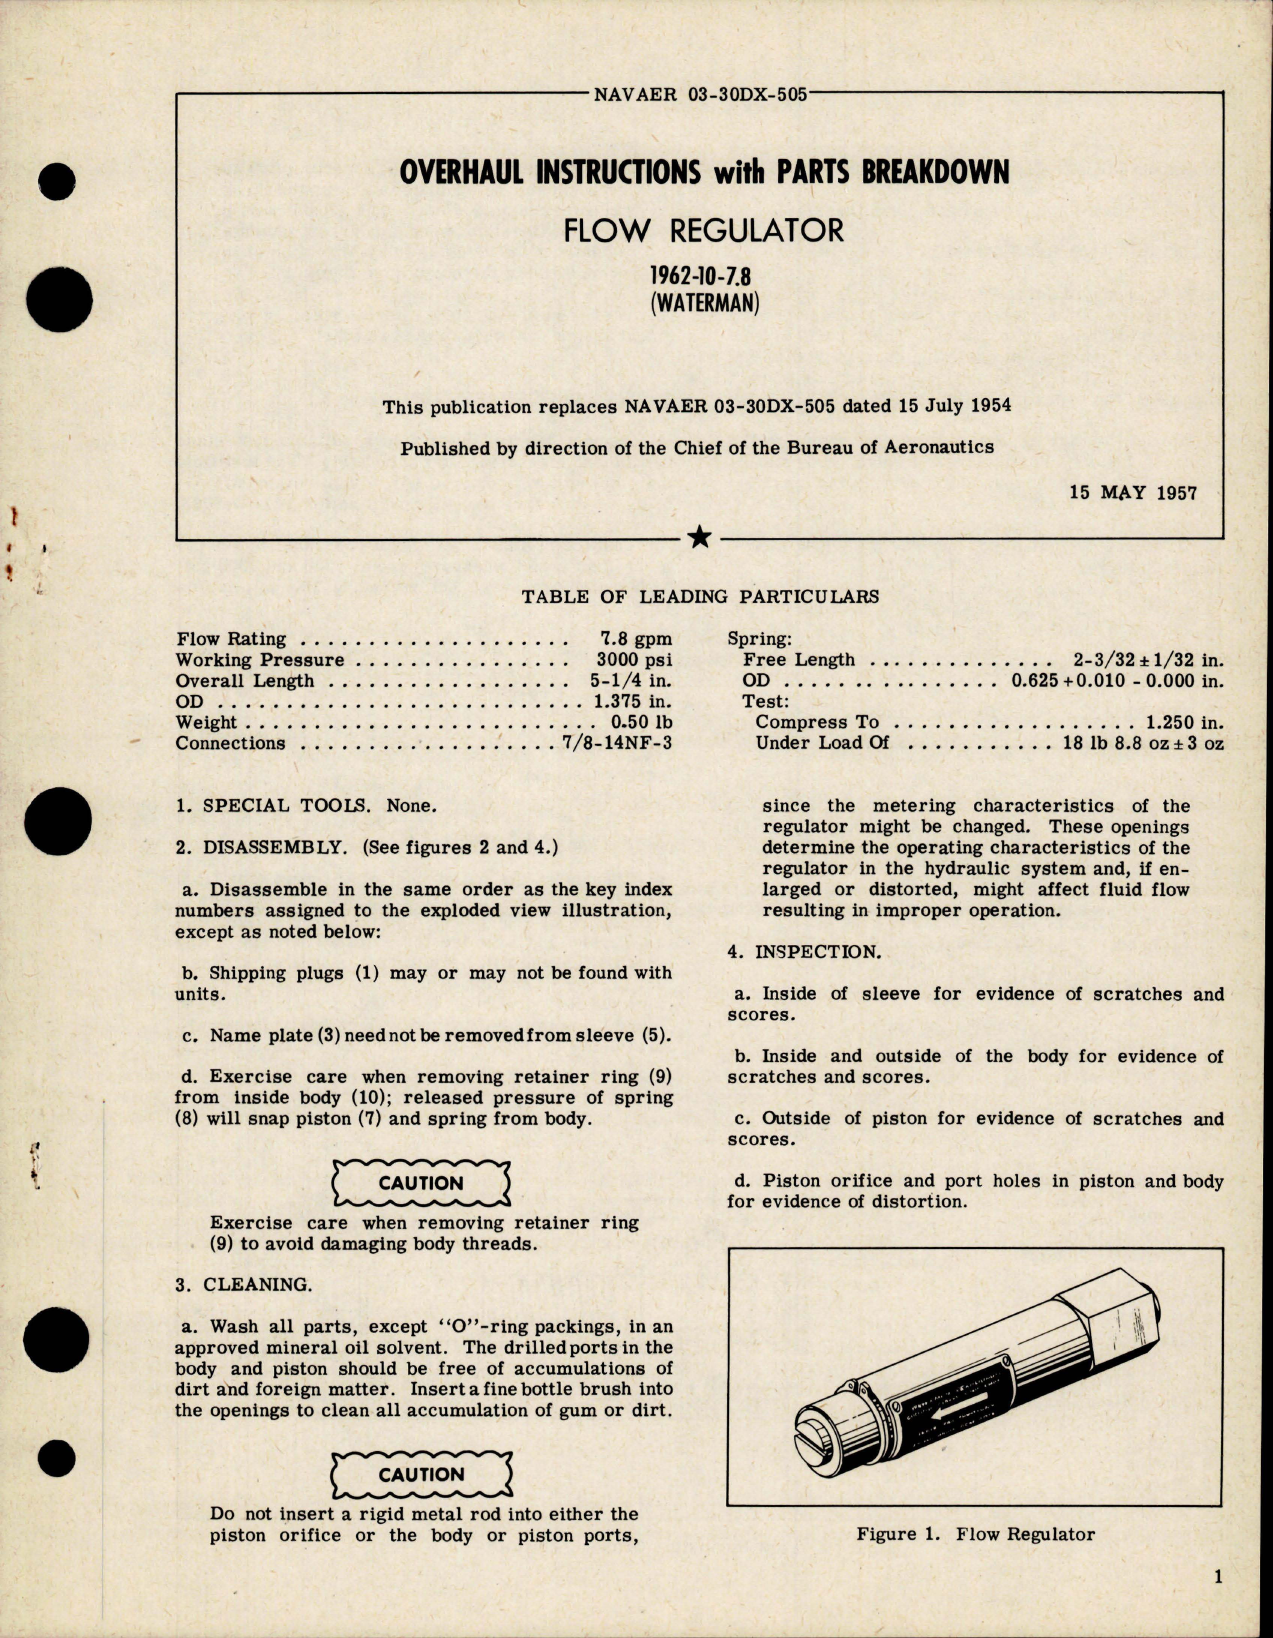 Sample page 1 from AirCorps Library document: Overhaul Instructions with Parts Breakdown for Flow Regulator - 1962-10-7.8 